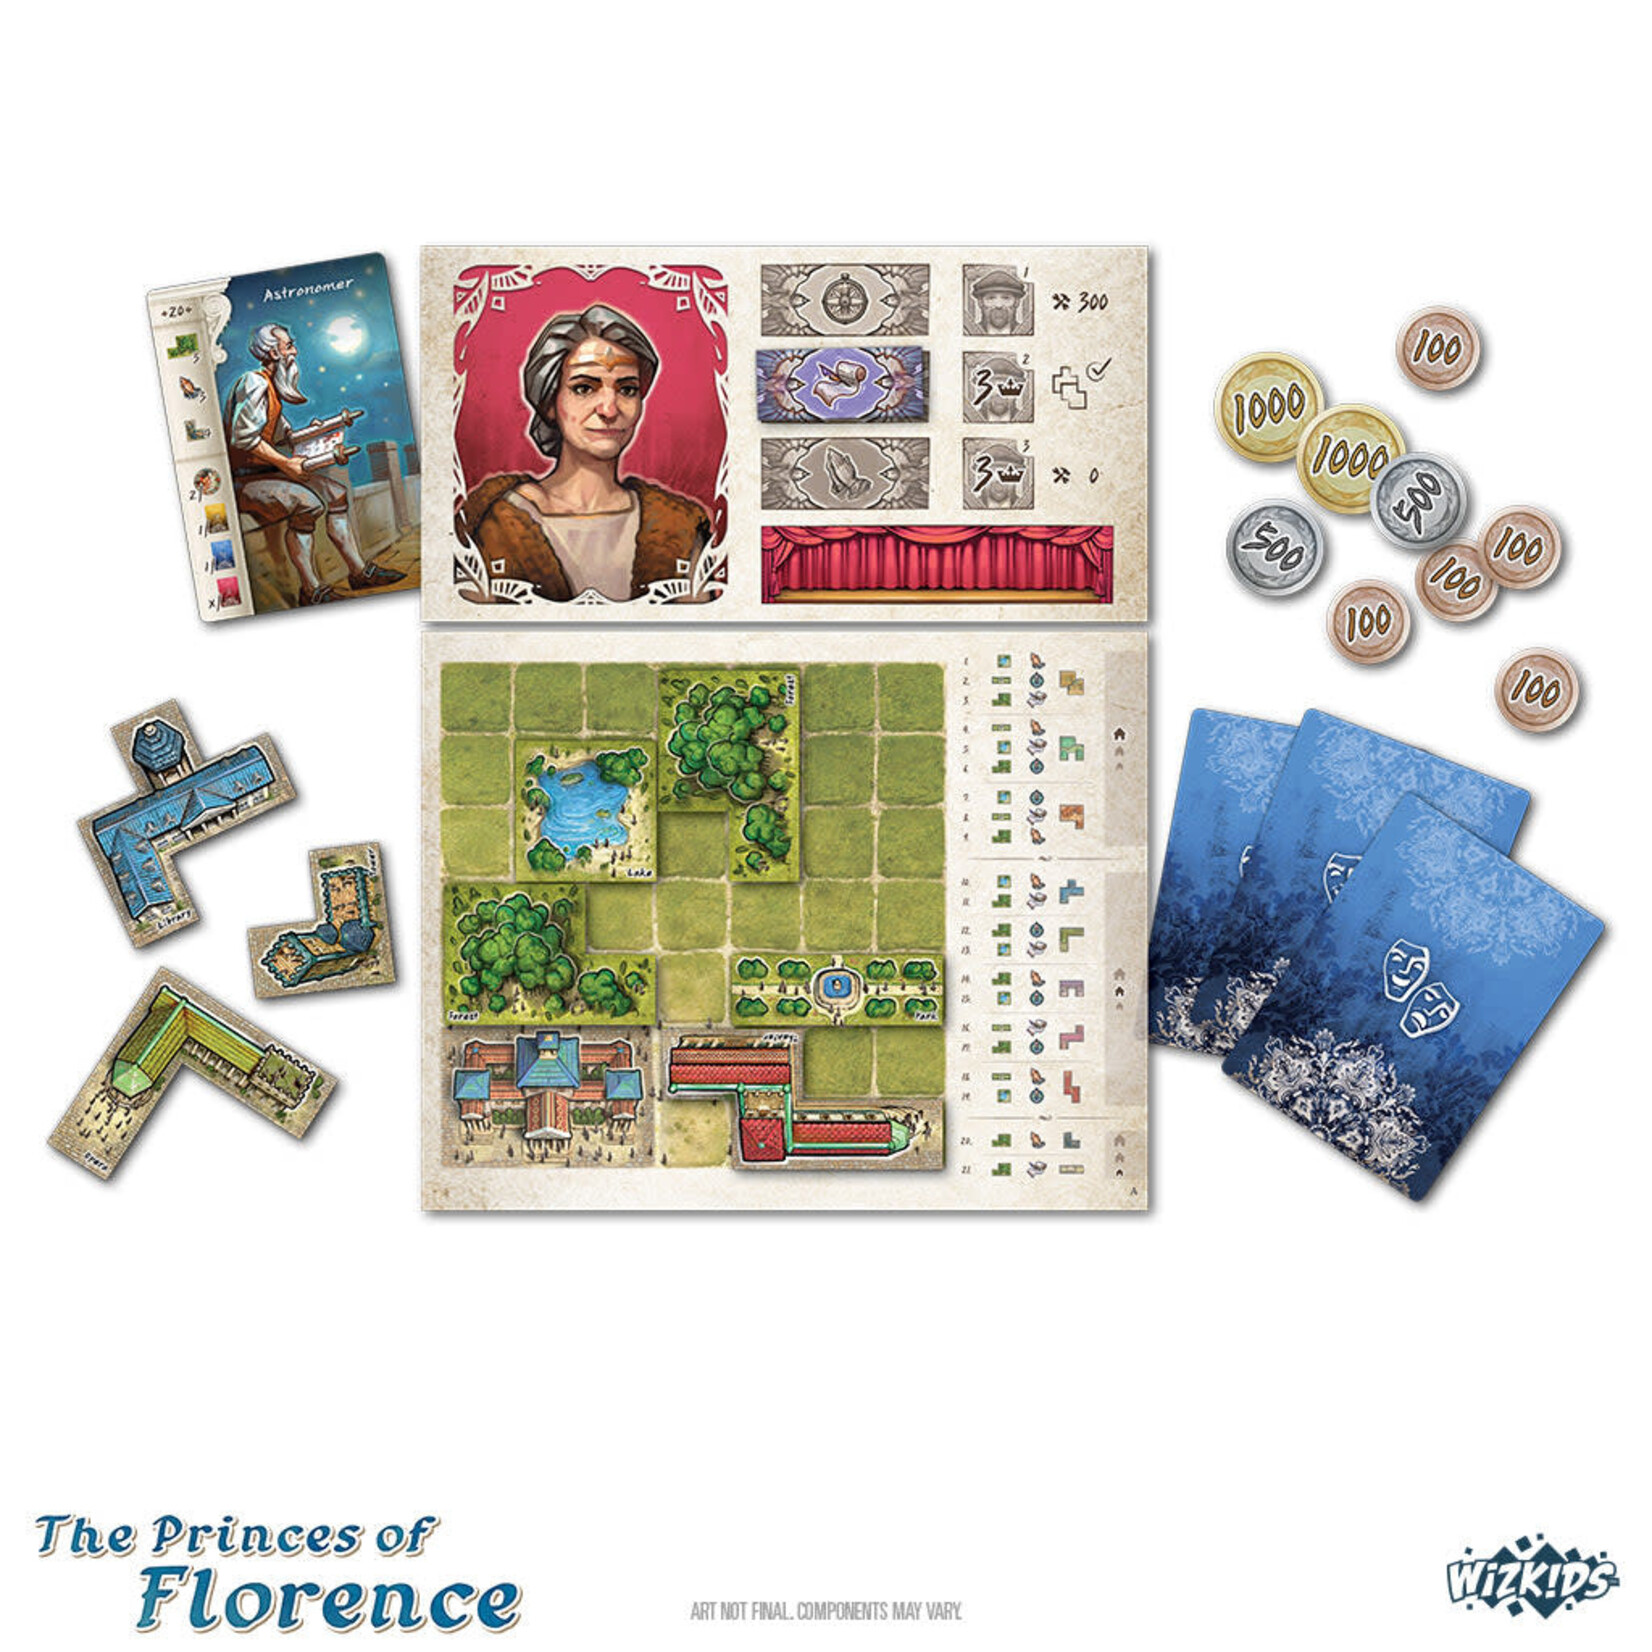 WizKids Princes of Florence, The